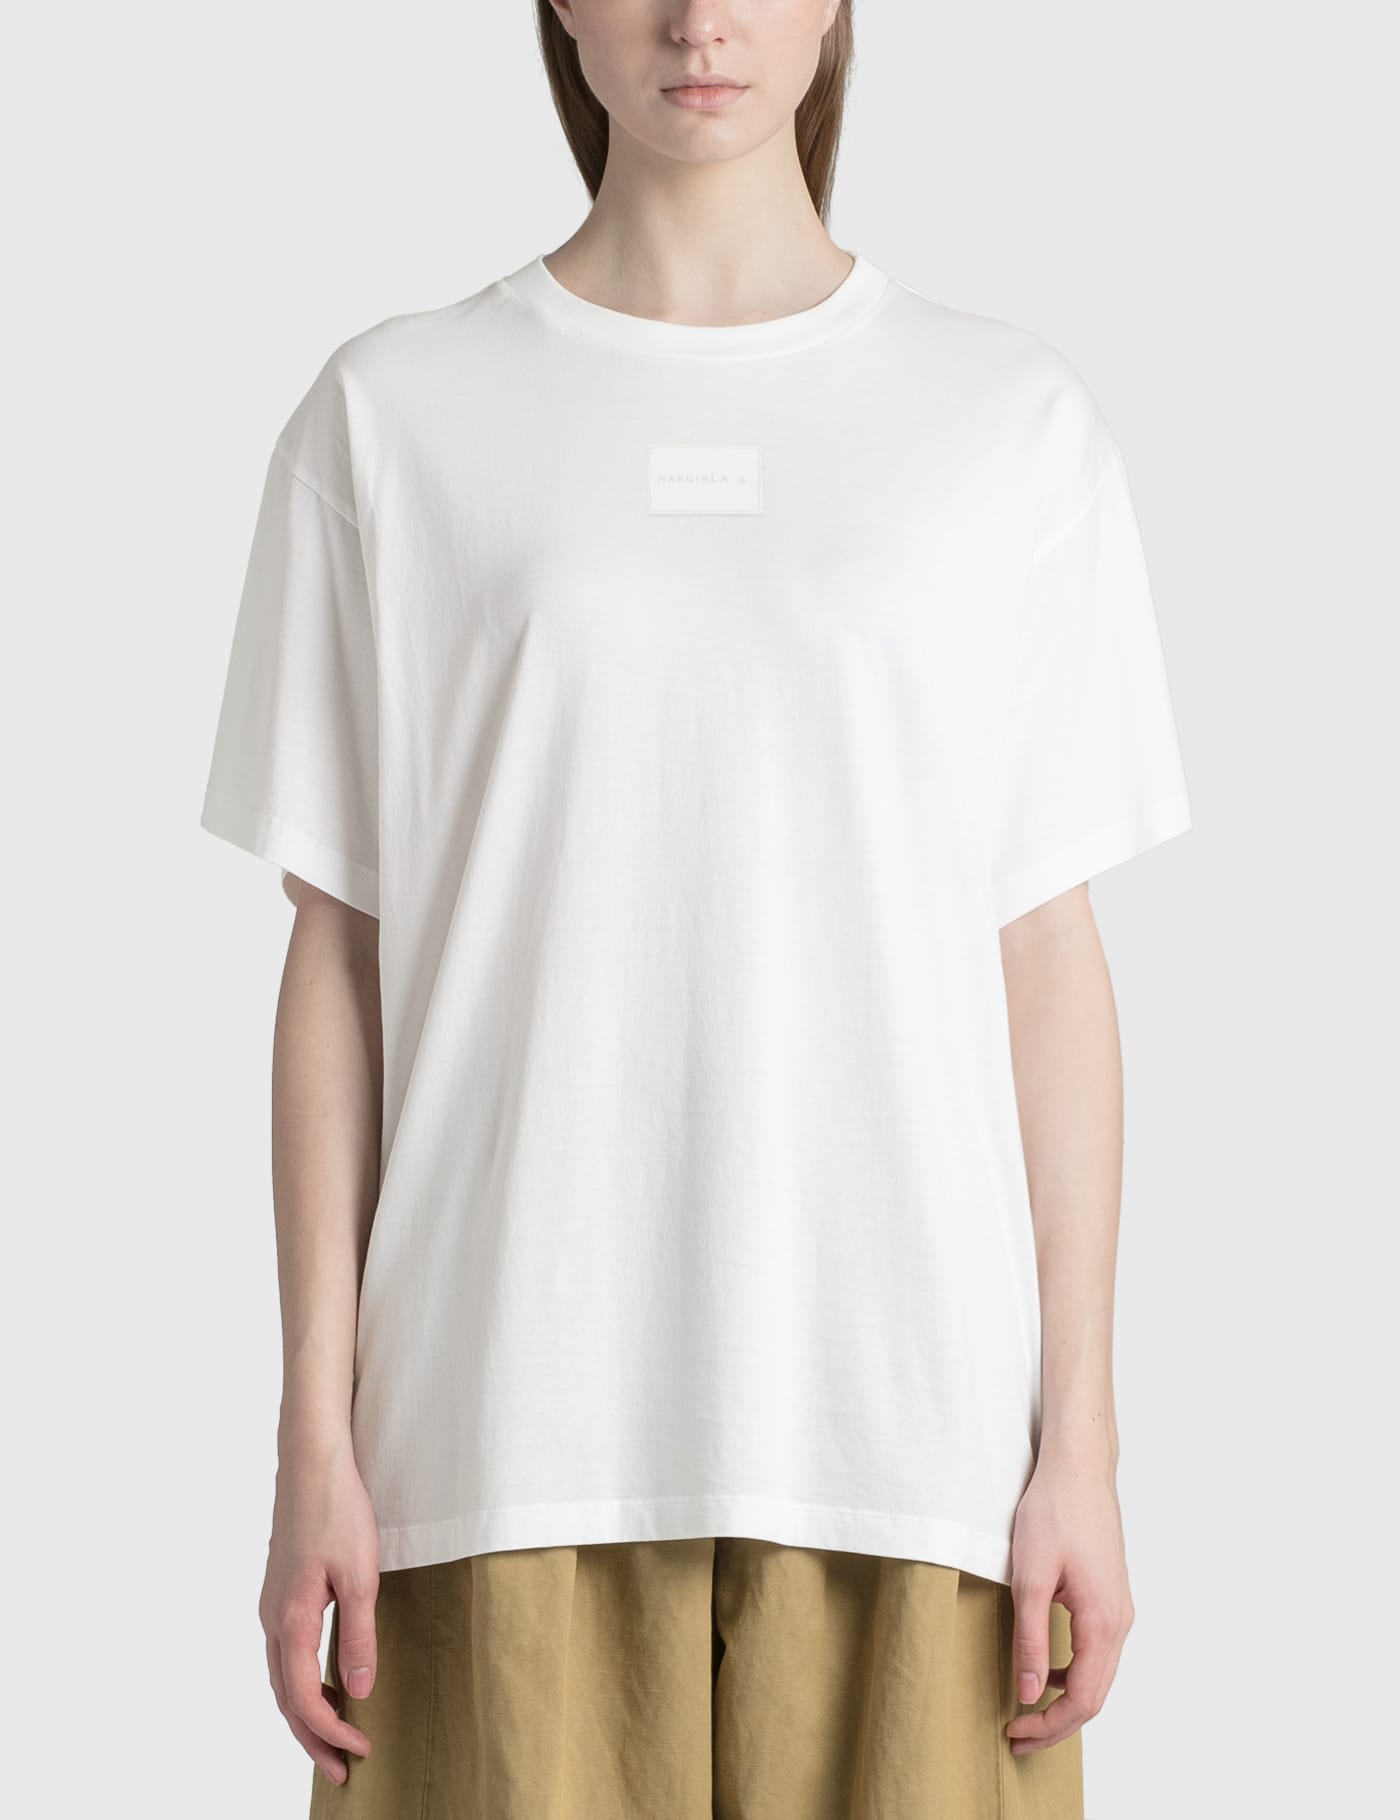 Margiela 6 Label Relaxed-Fit T-shirt